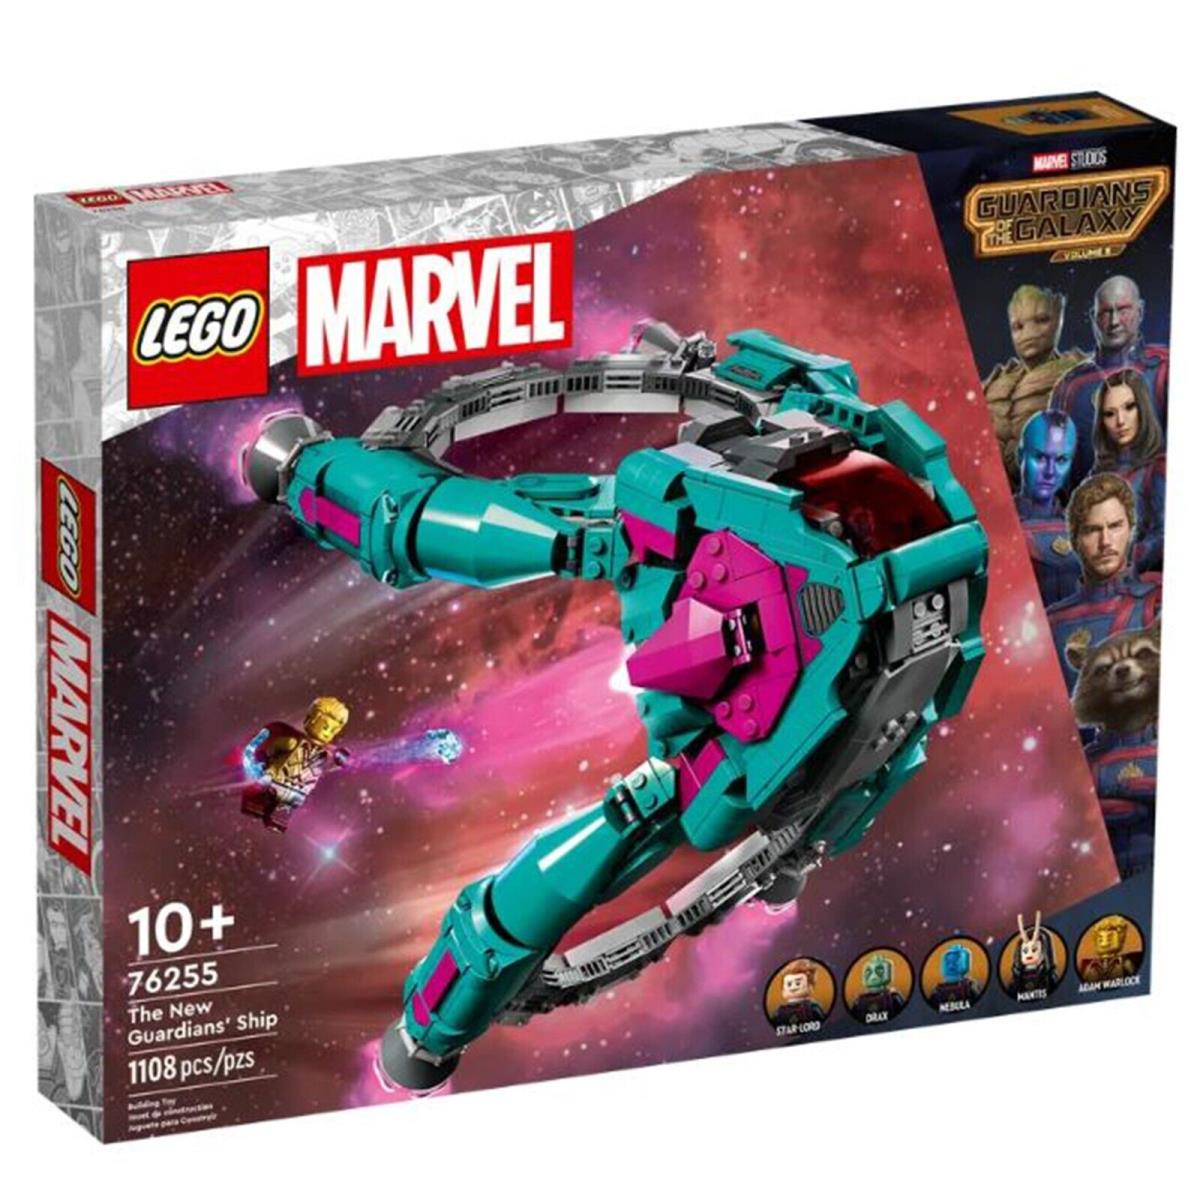 Lego Marvel Guardians Of The Galaxy The Guardians` Ship Building Set 76255